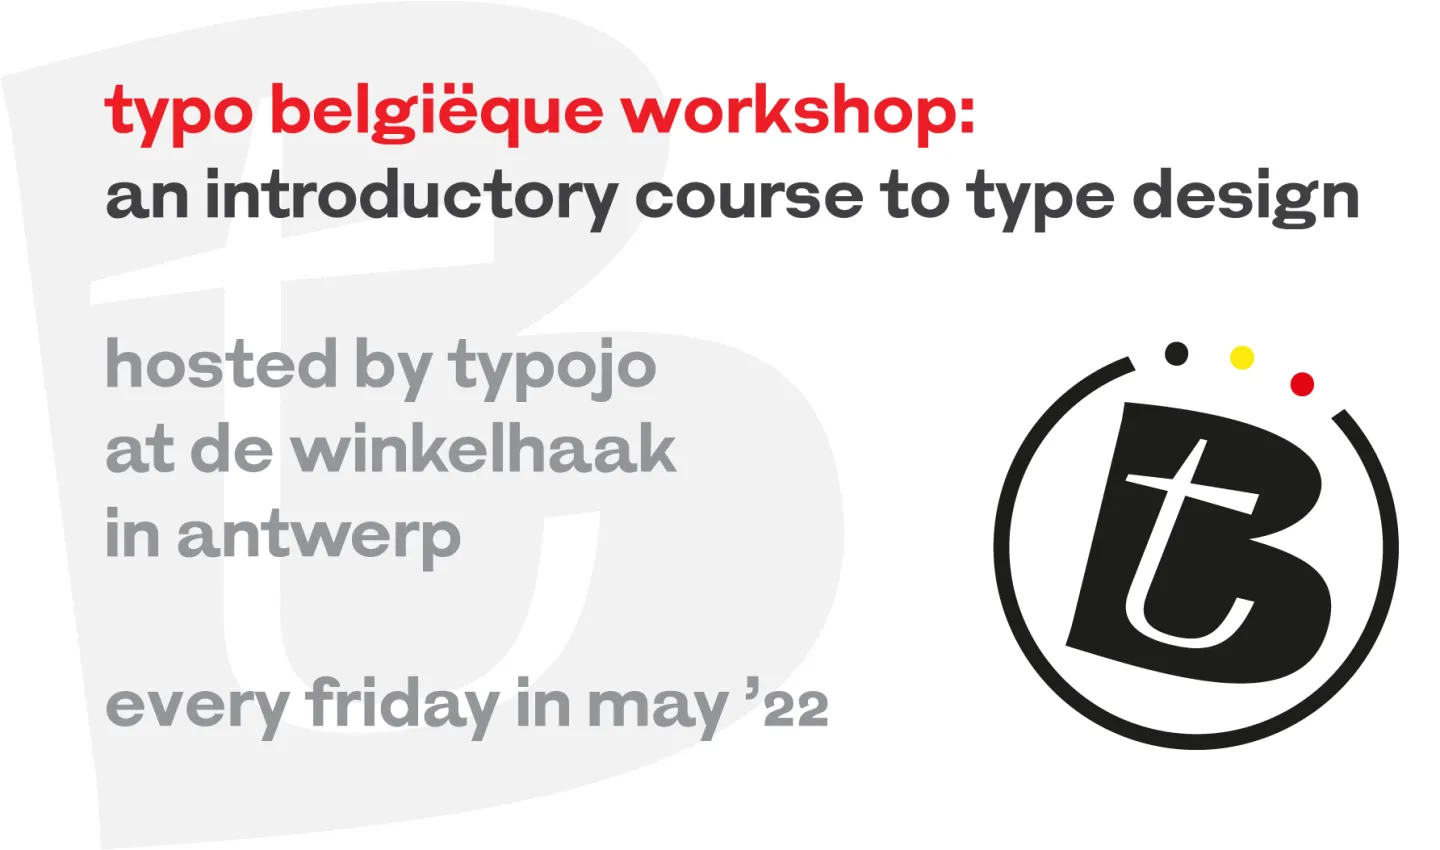 typo belgiëque workshop: an introductory course to type design 3/4